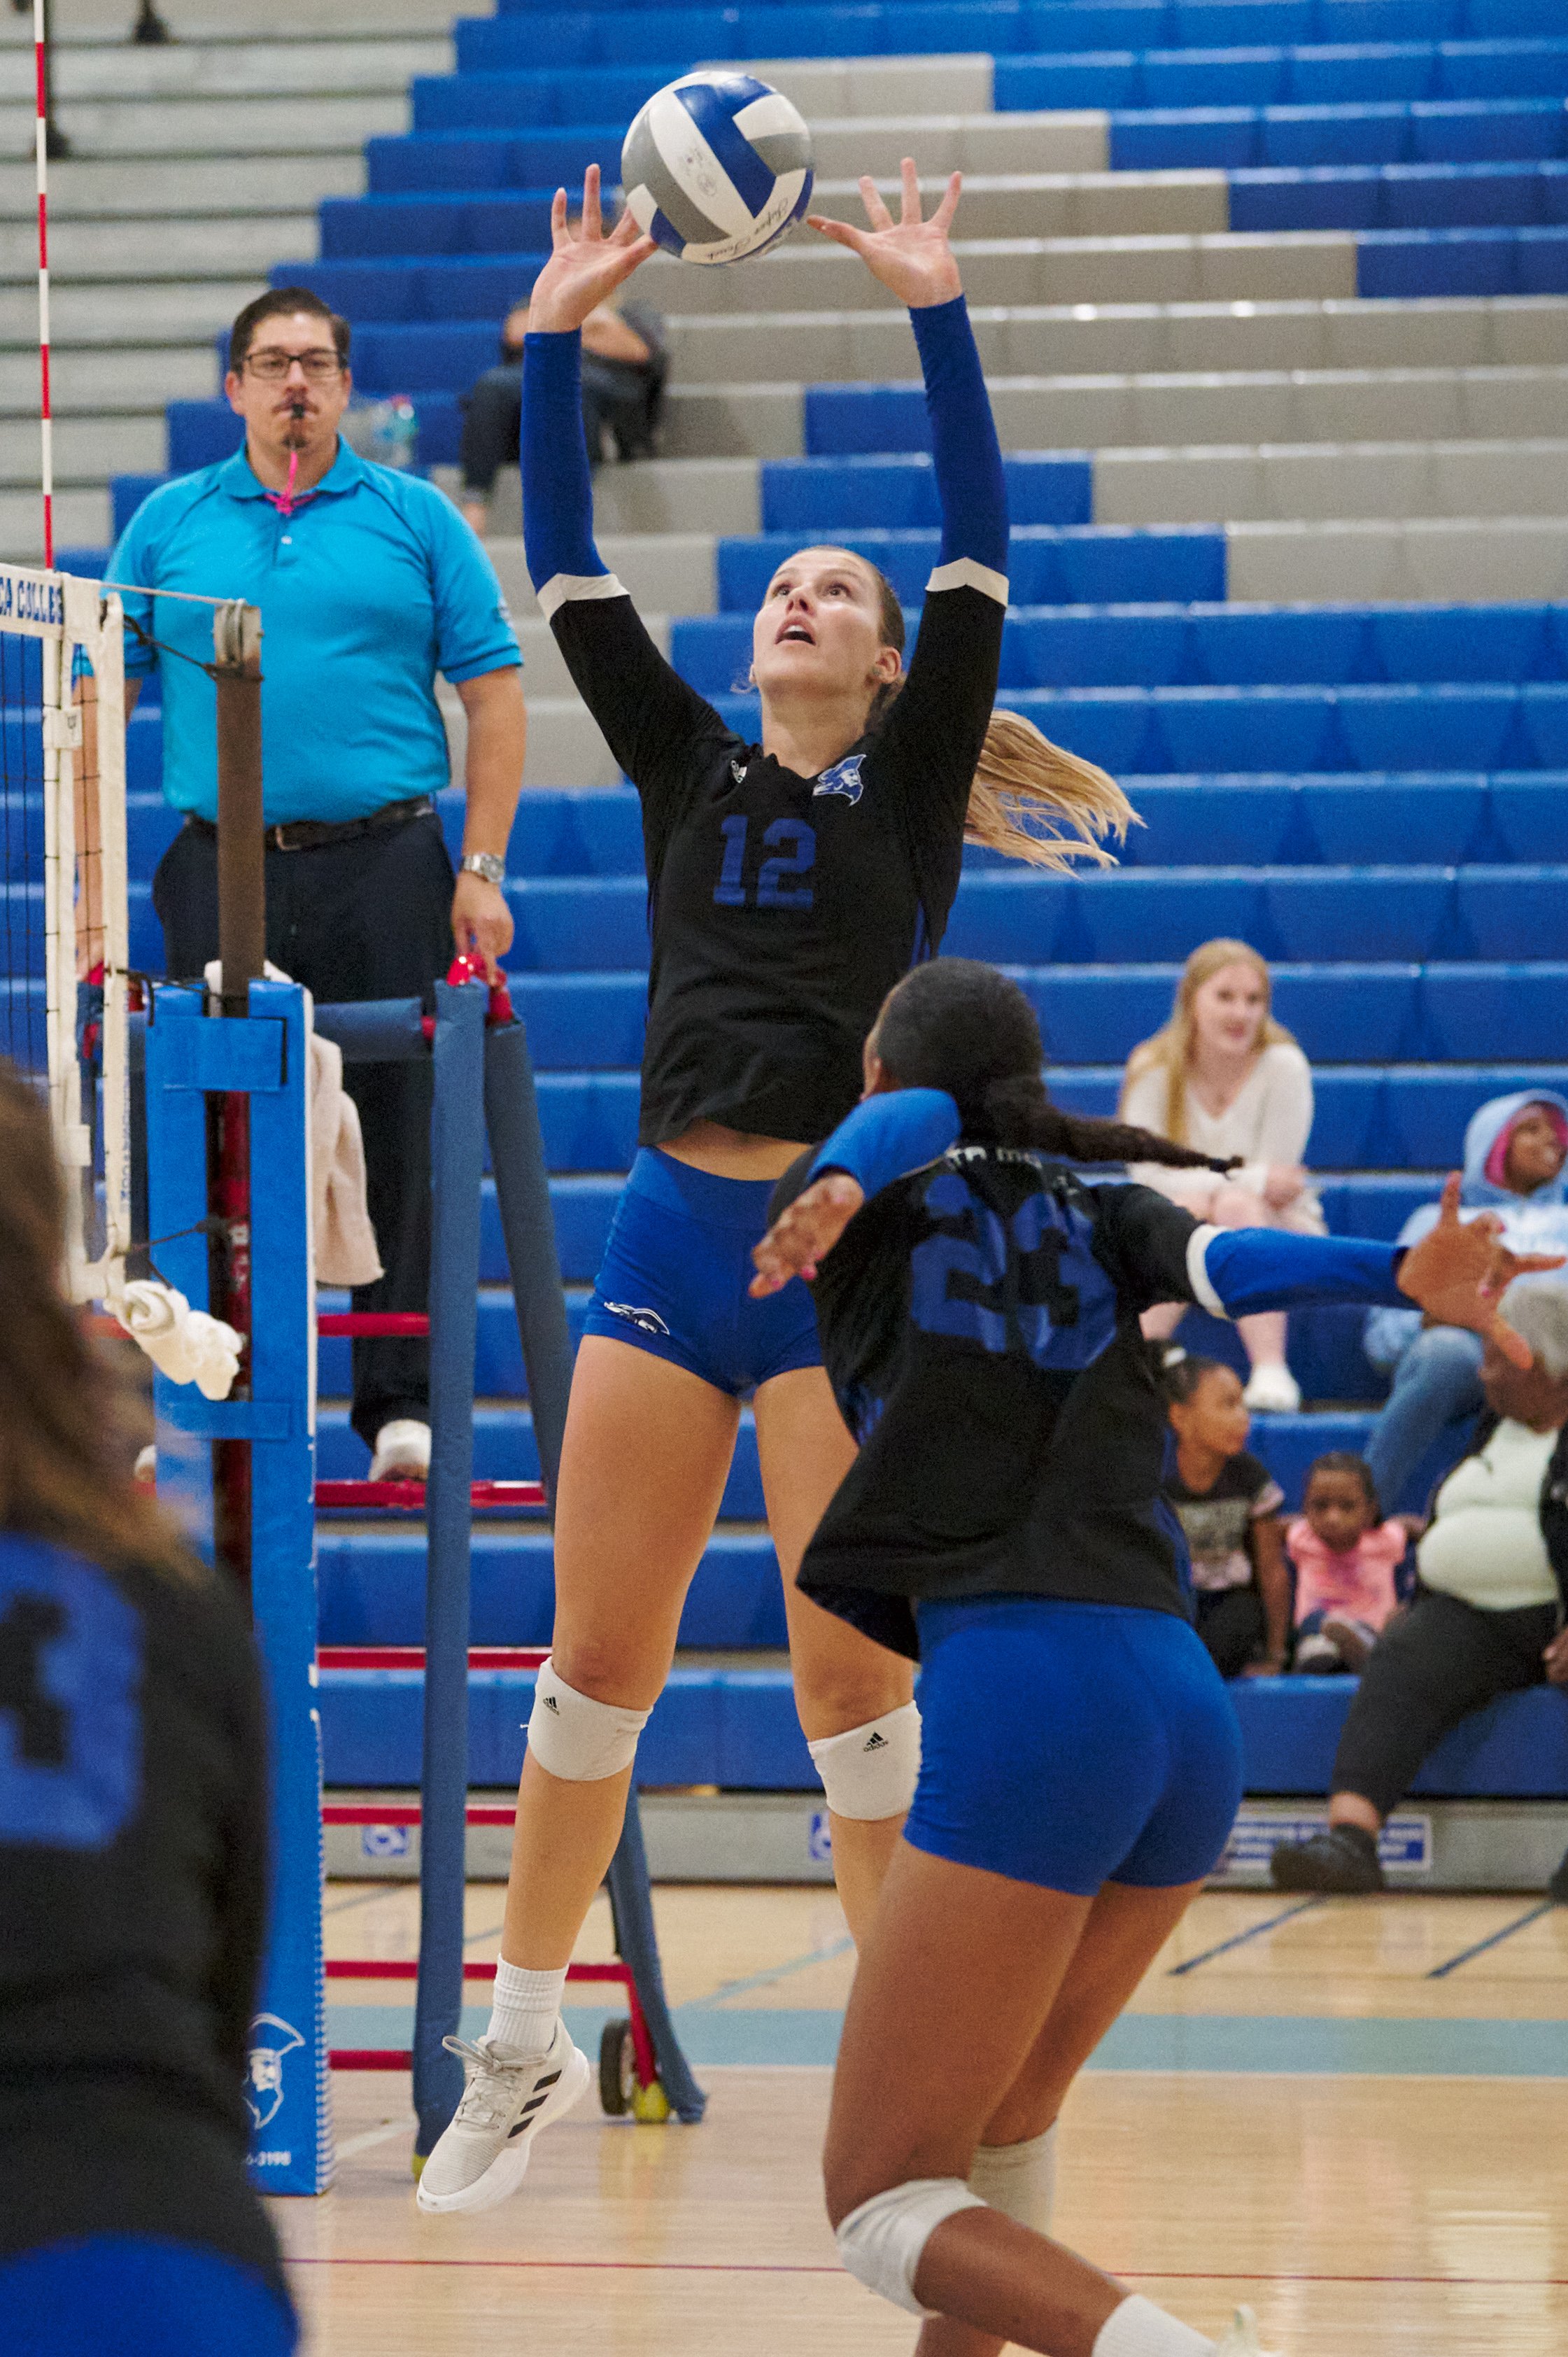  Santa Monica College Corsairs' Mia Paulson sets the ball during the women's volleyball match against the Antelope Valley College Marauders on Wednesday, Oct. 12, 2022, at the Corsair Gym in Santa Monica, Calif. The Corsairs won 3-1. (Nicholas McCall